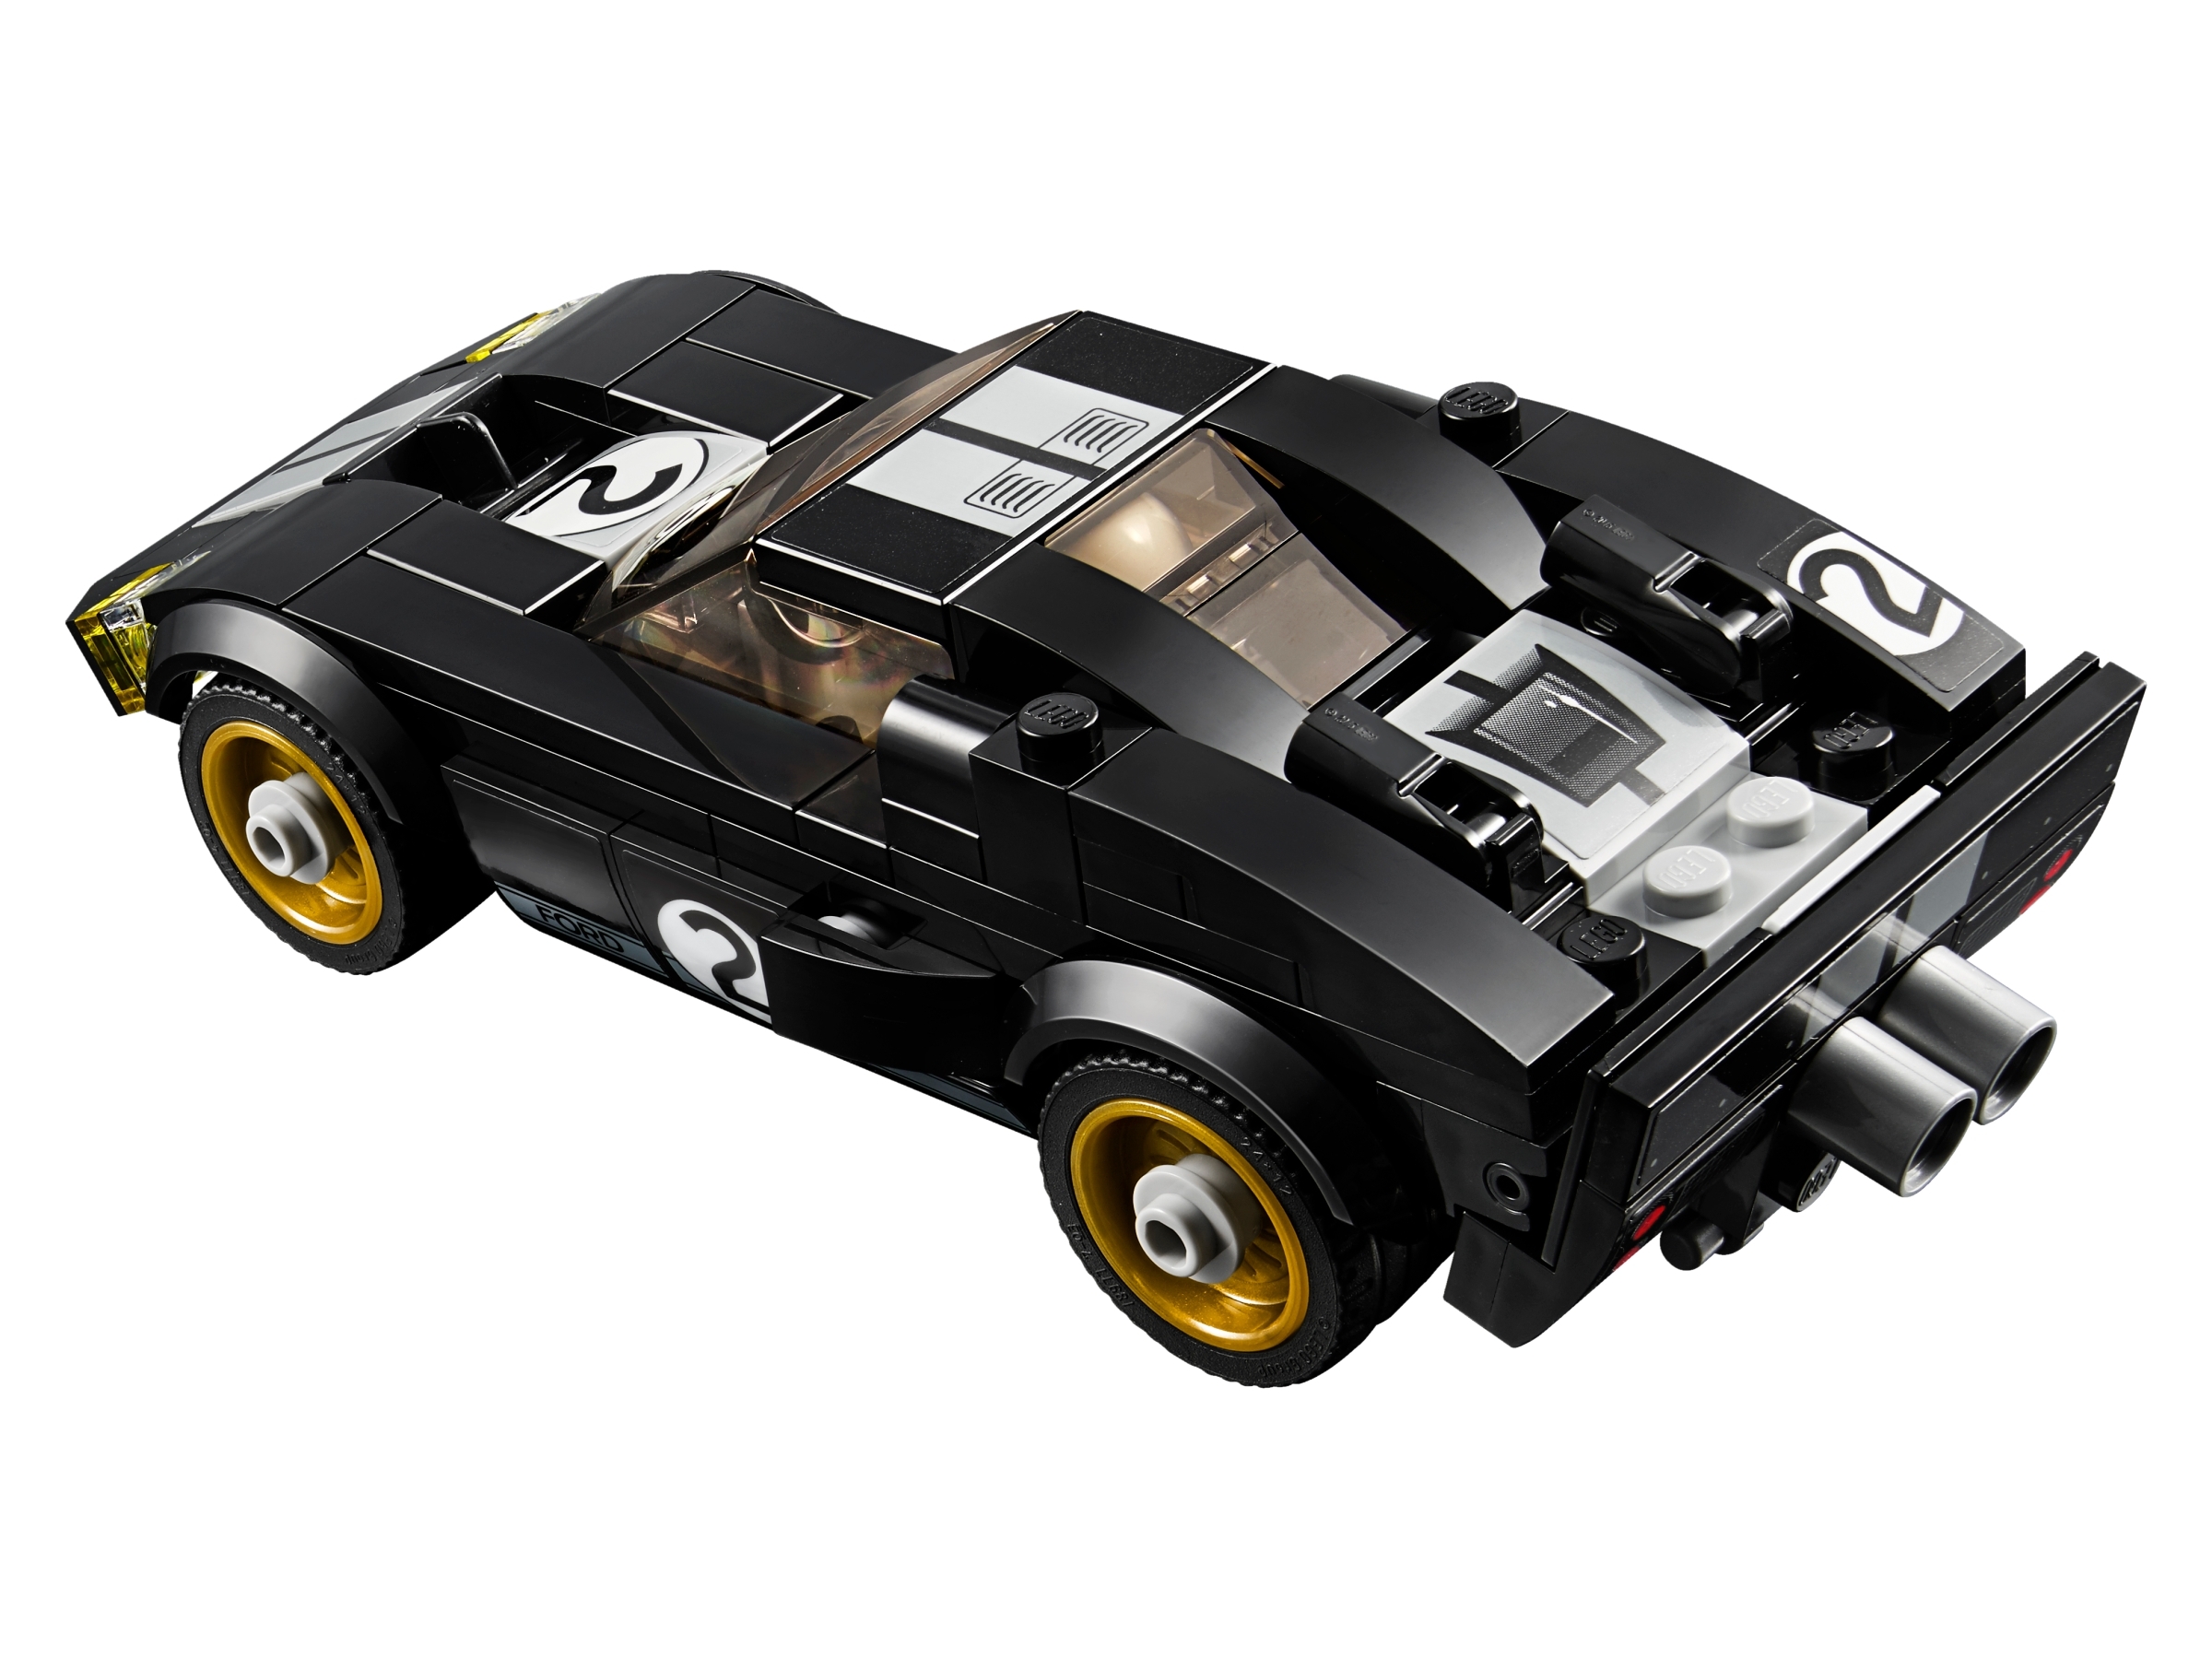 LEGO Speed Champions 2016 Ford GT 1966 Gt40 75881 for sale online